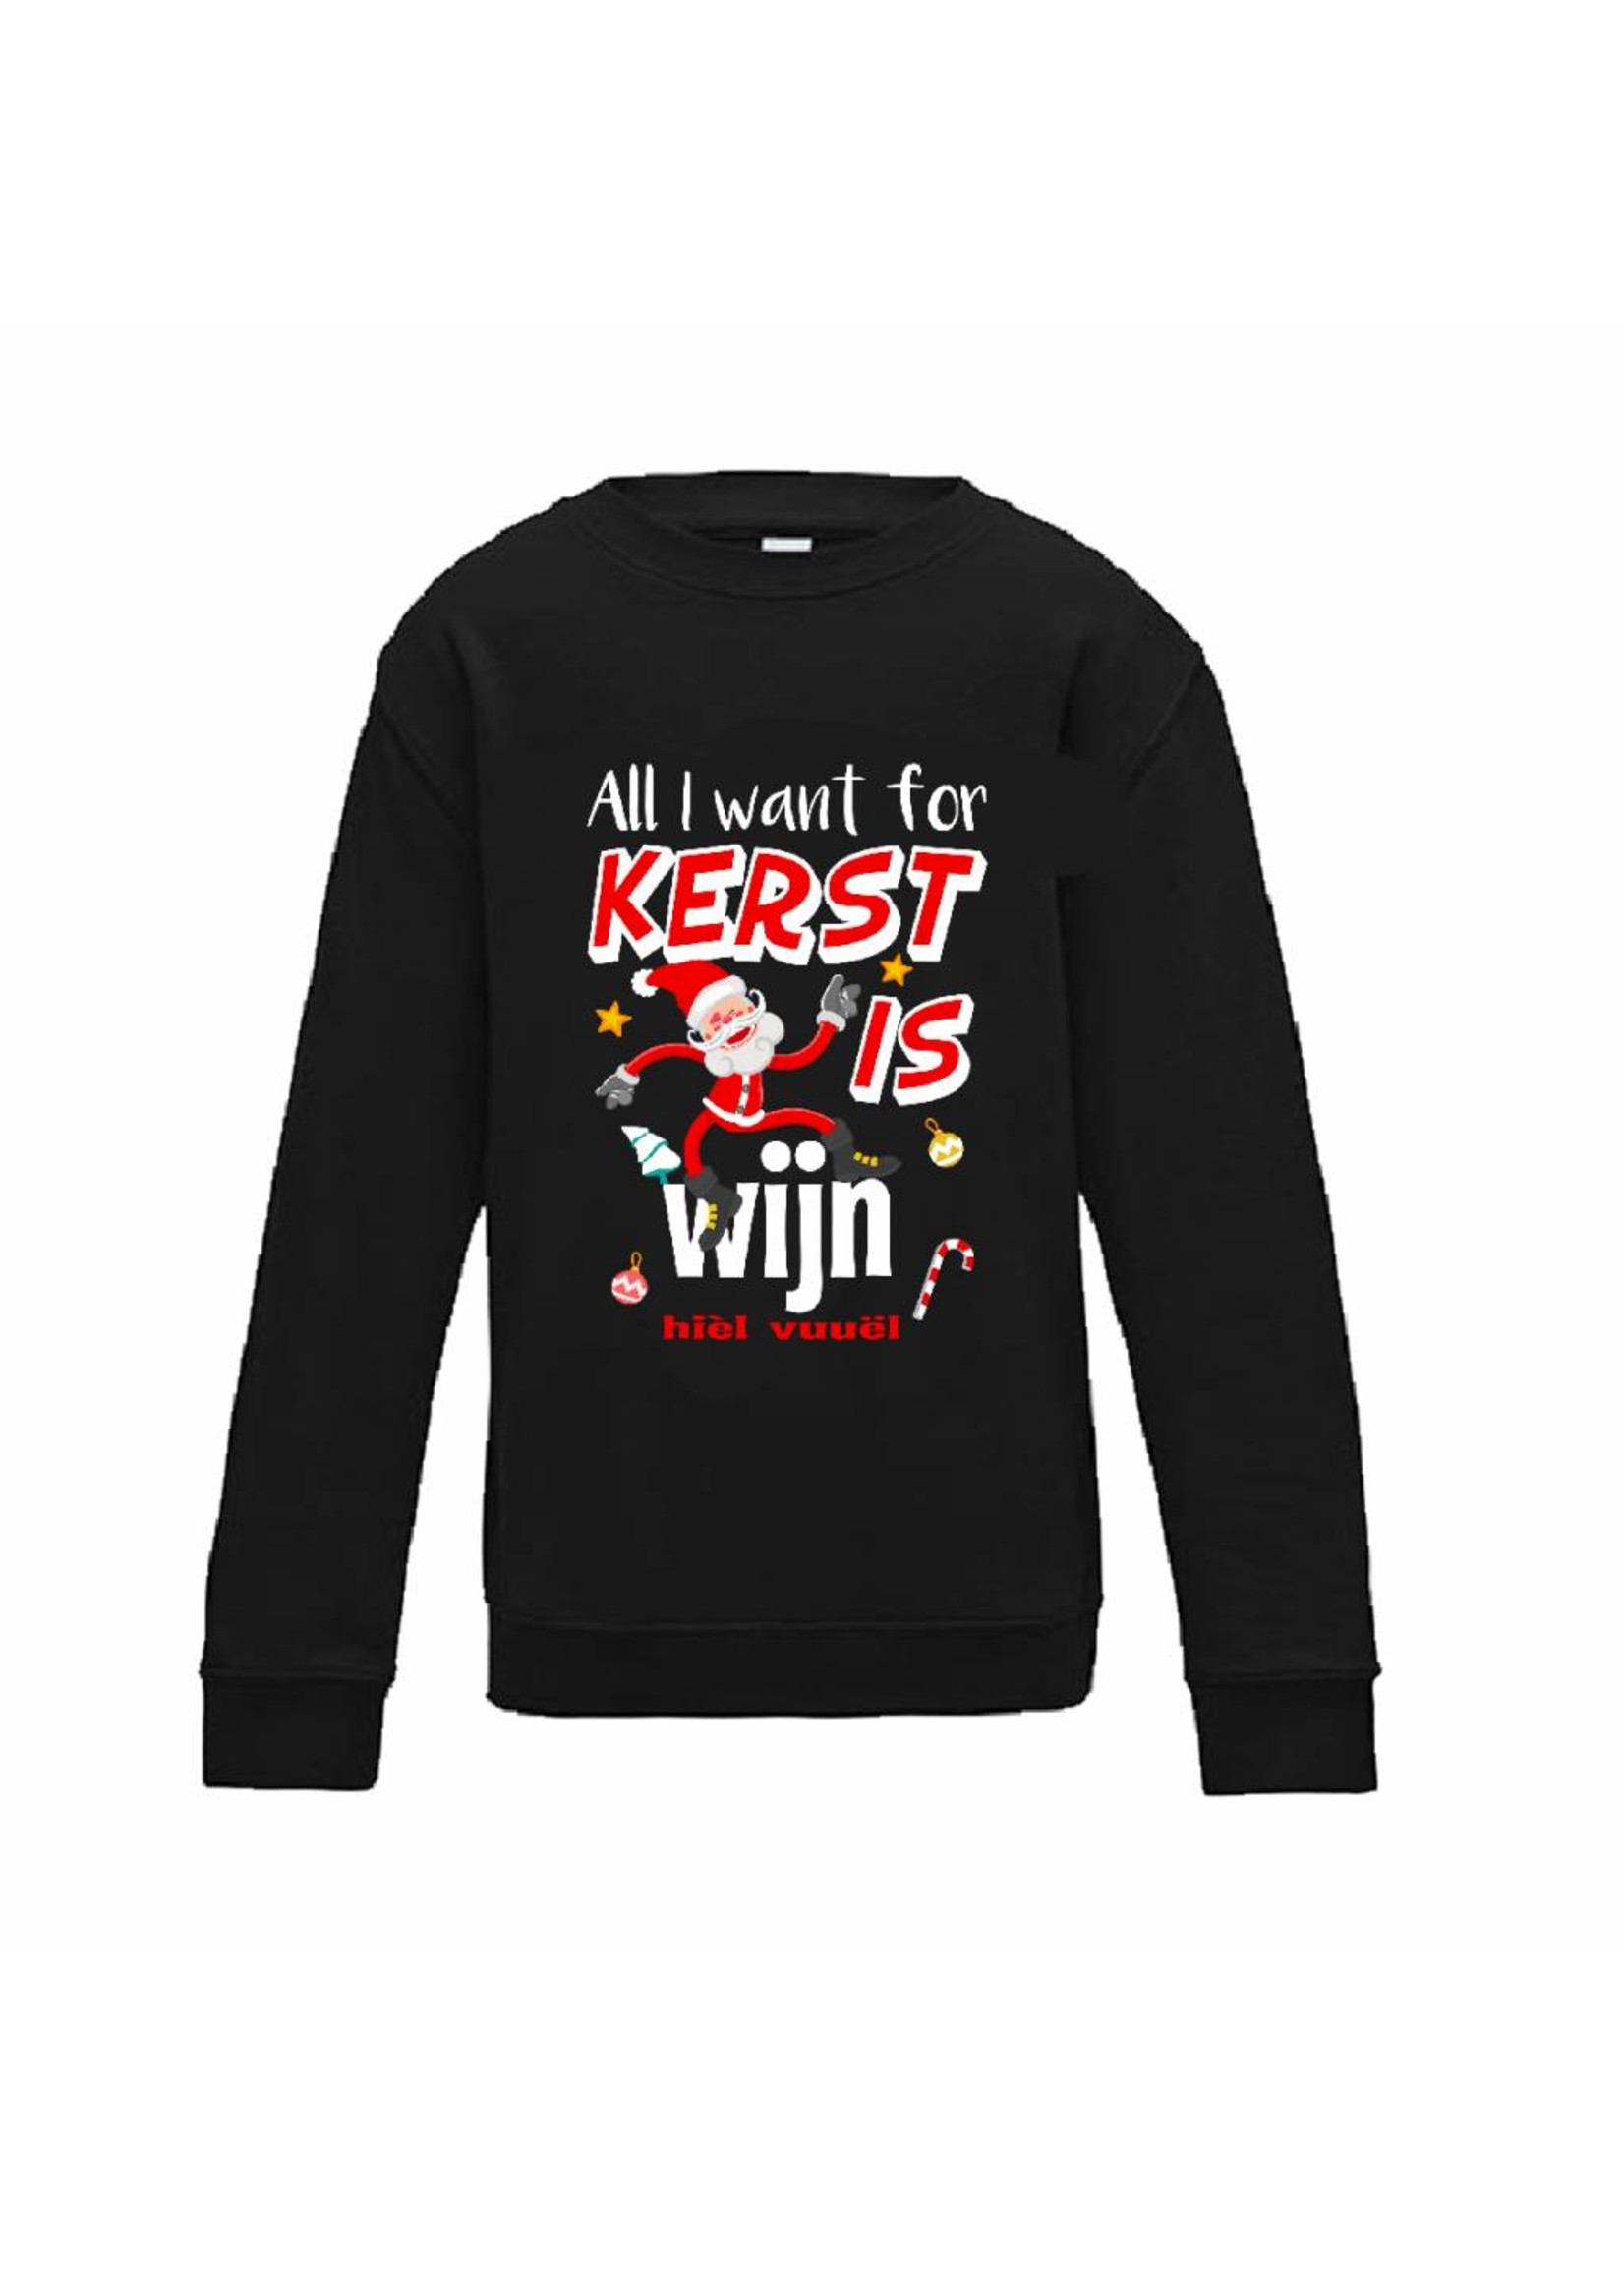 All I want for kerst is wijn sweater